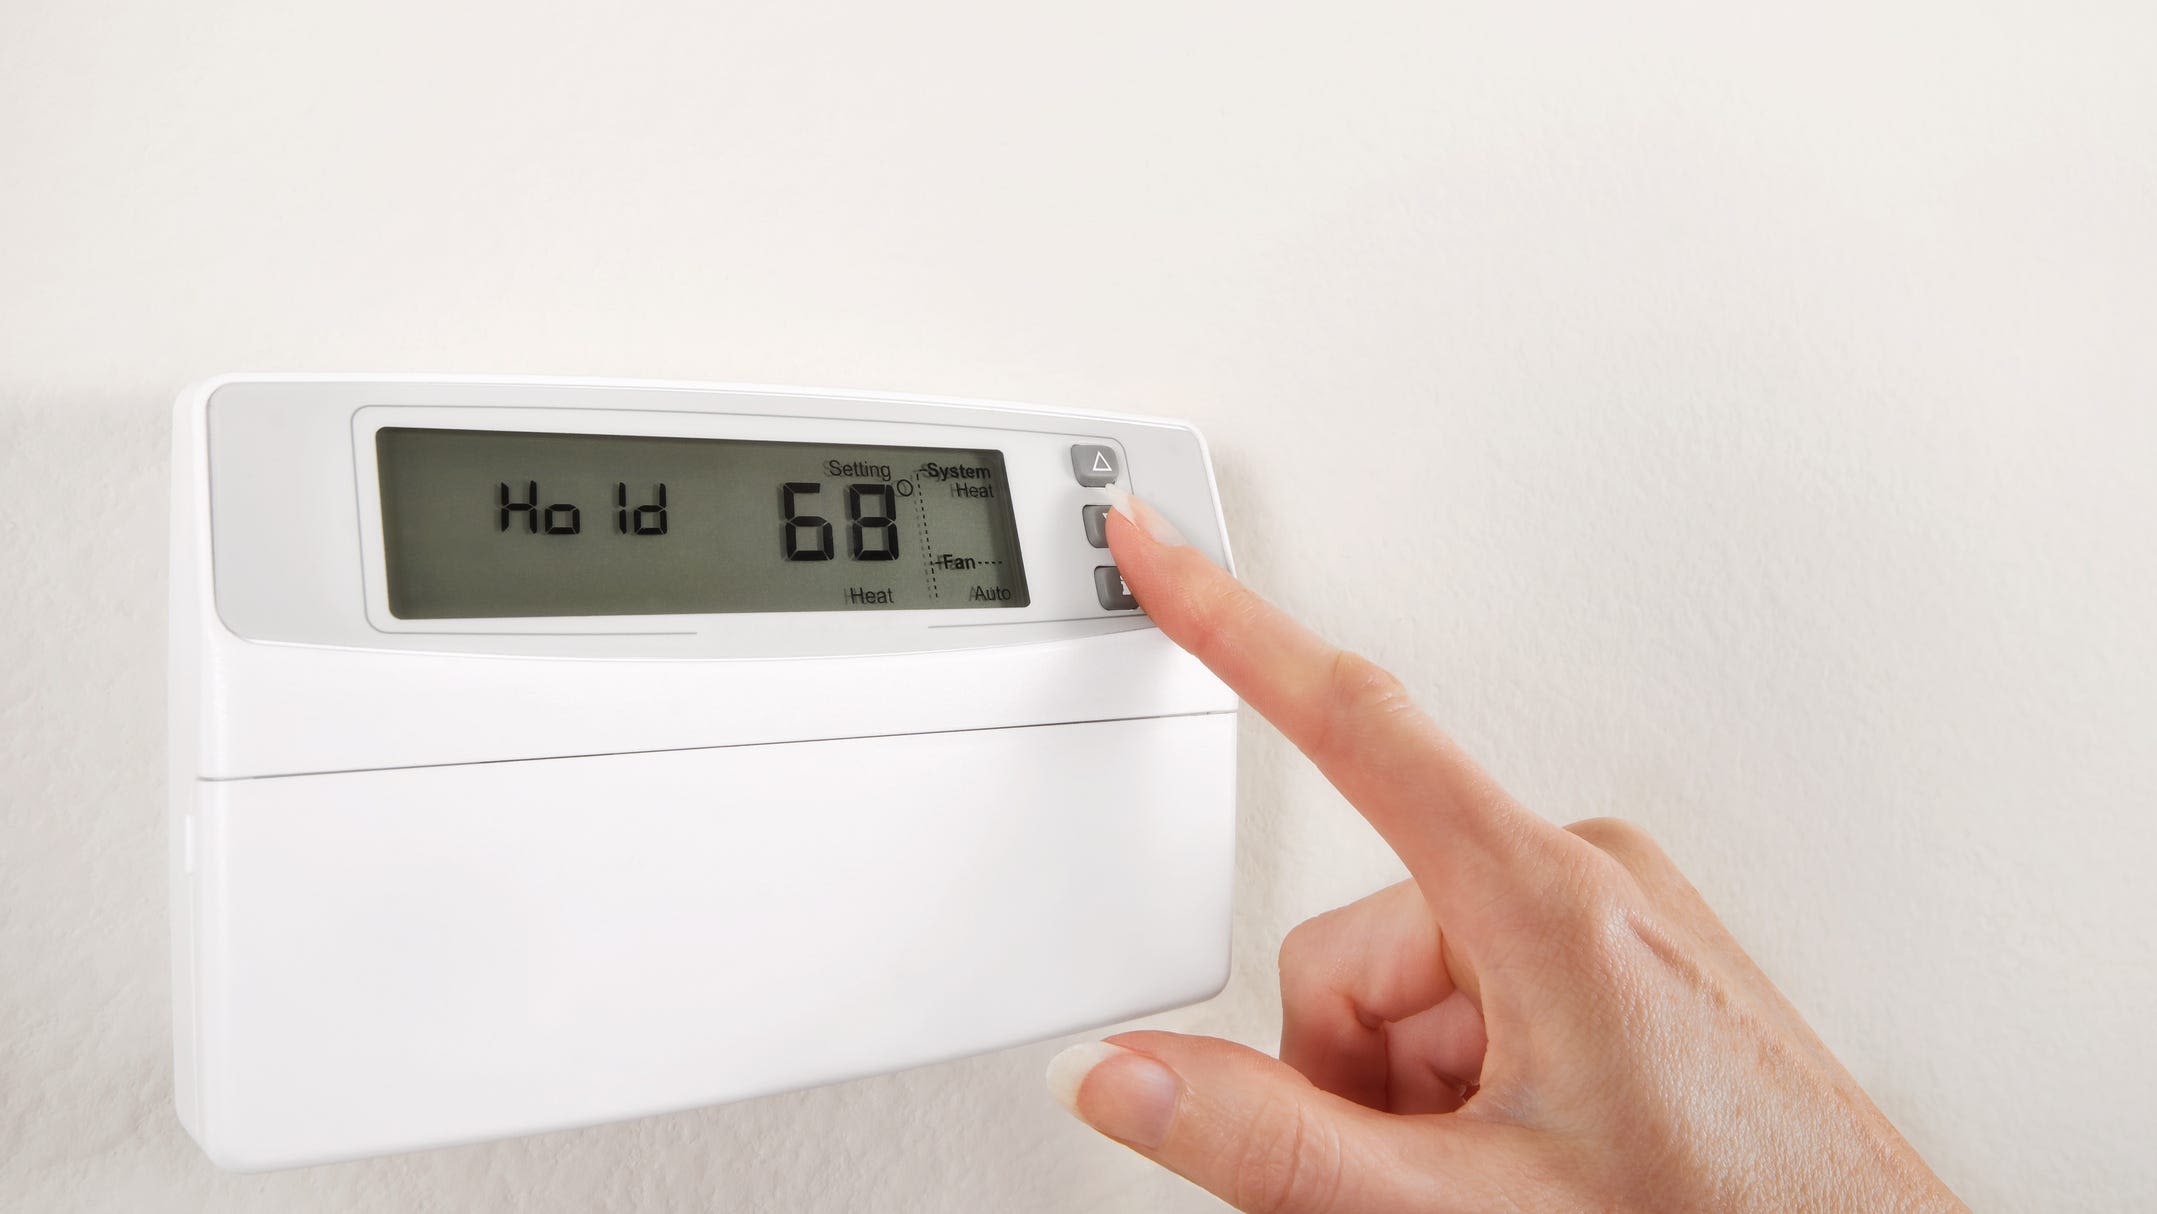 Let's settle a debate, Arizona. What temperature do you set your AC thermostat at?